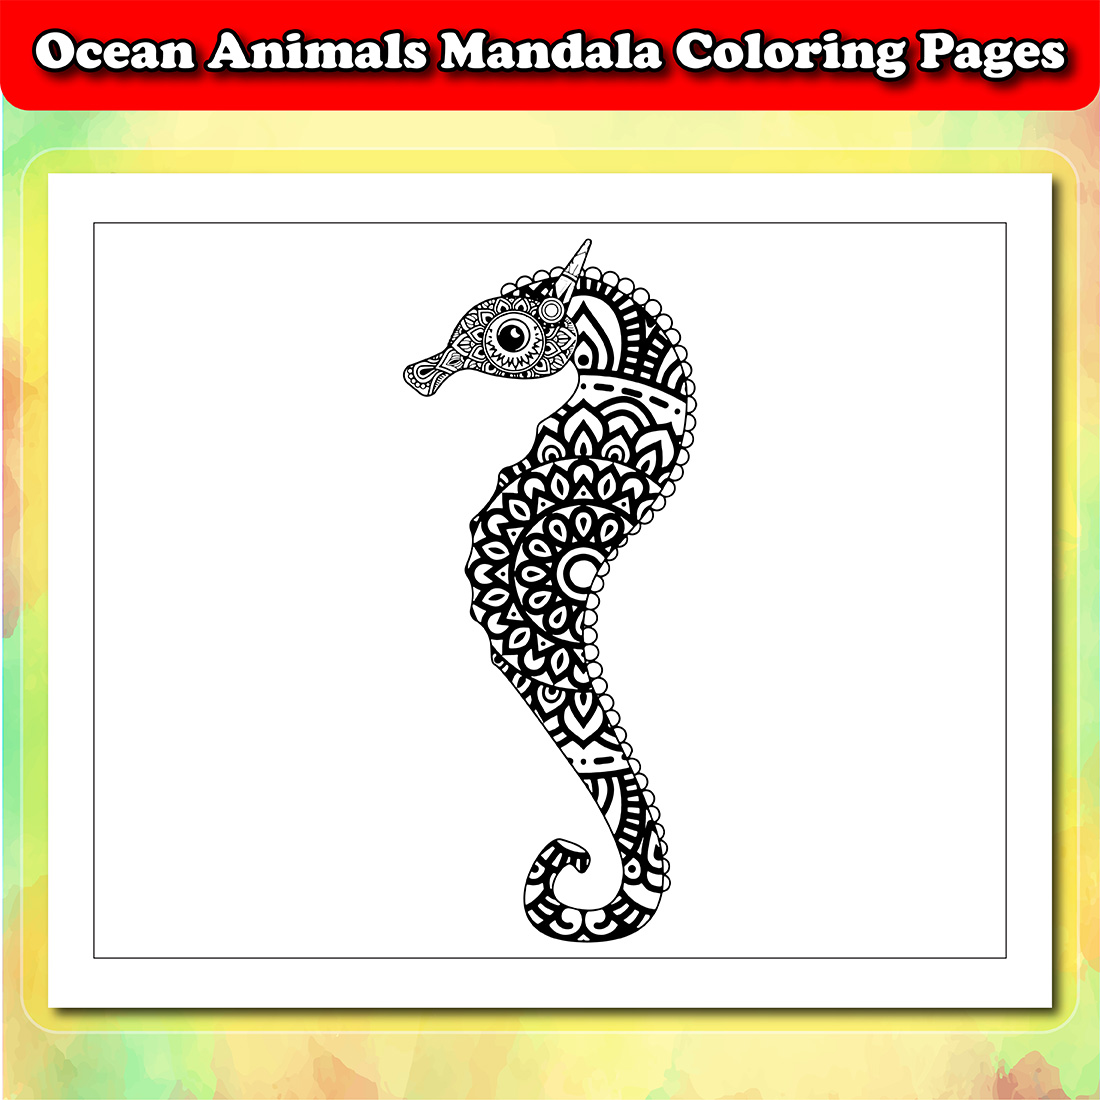 preview image Ocean Animals Mandala Coloring Pages.